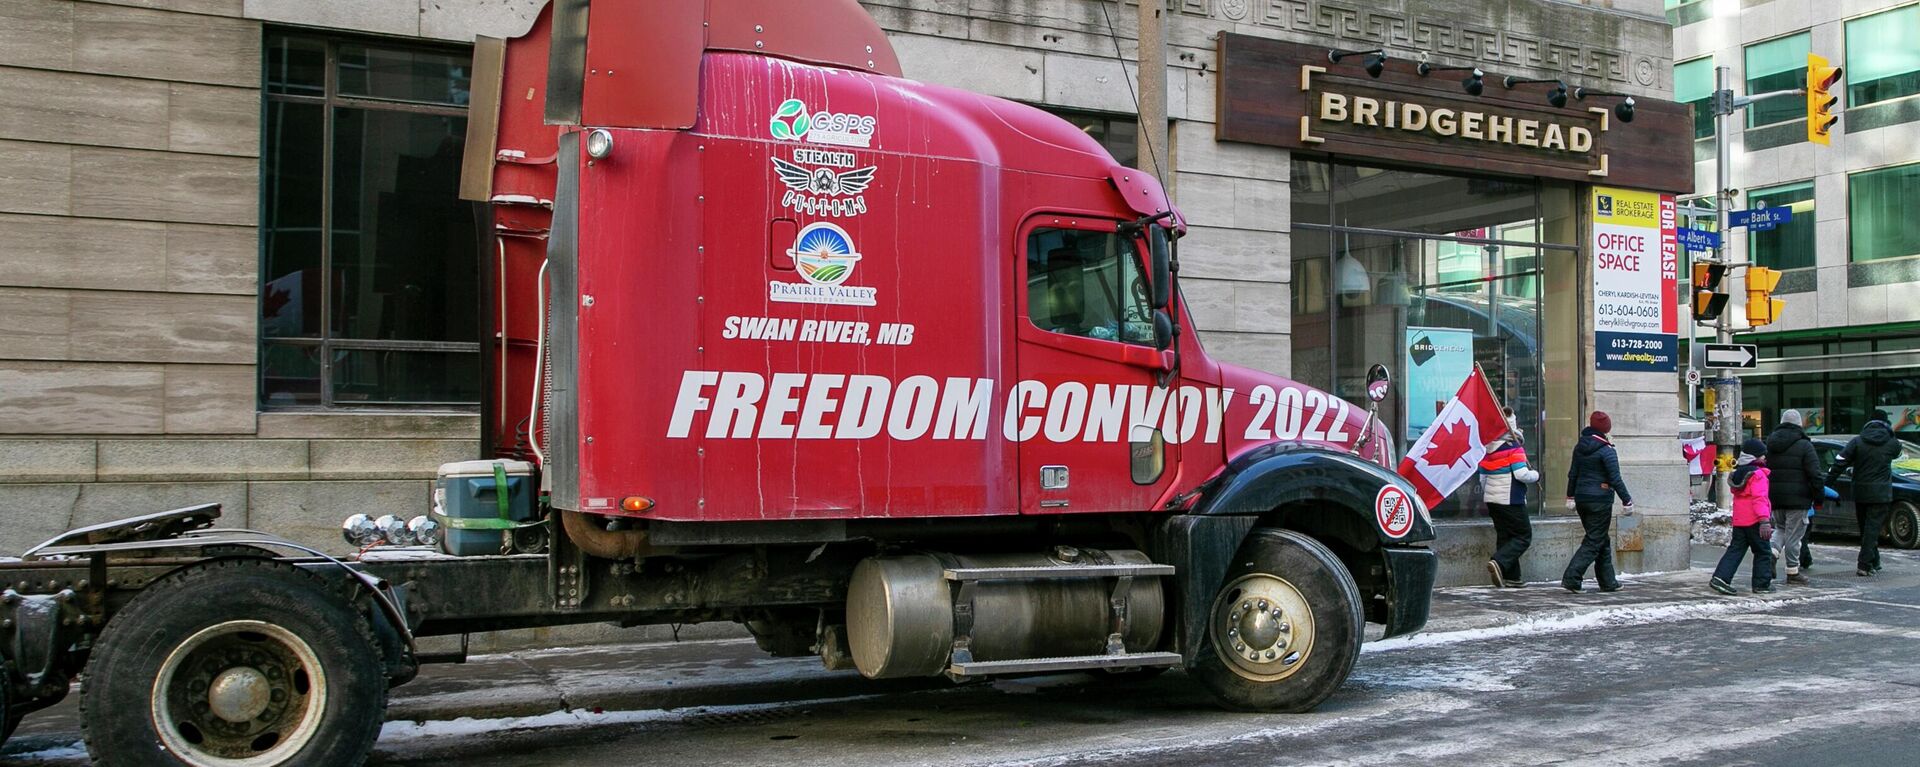 The words Freedom Convoy 2022 are visible on a truck that is part of a demonstration against COVID-19 restrictions in Ottawa, Ontario, Canada, on Sunday, Feb. 13, 2022. - Sputnik International, 1920, 19.04.2022